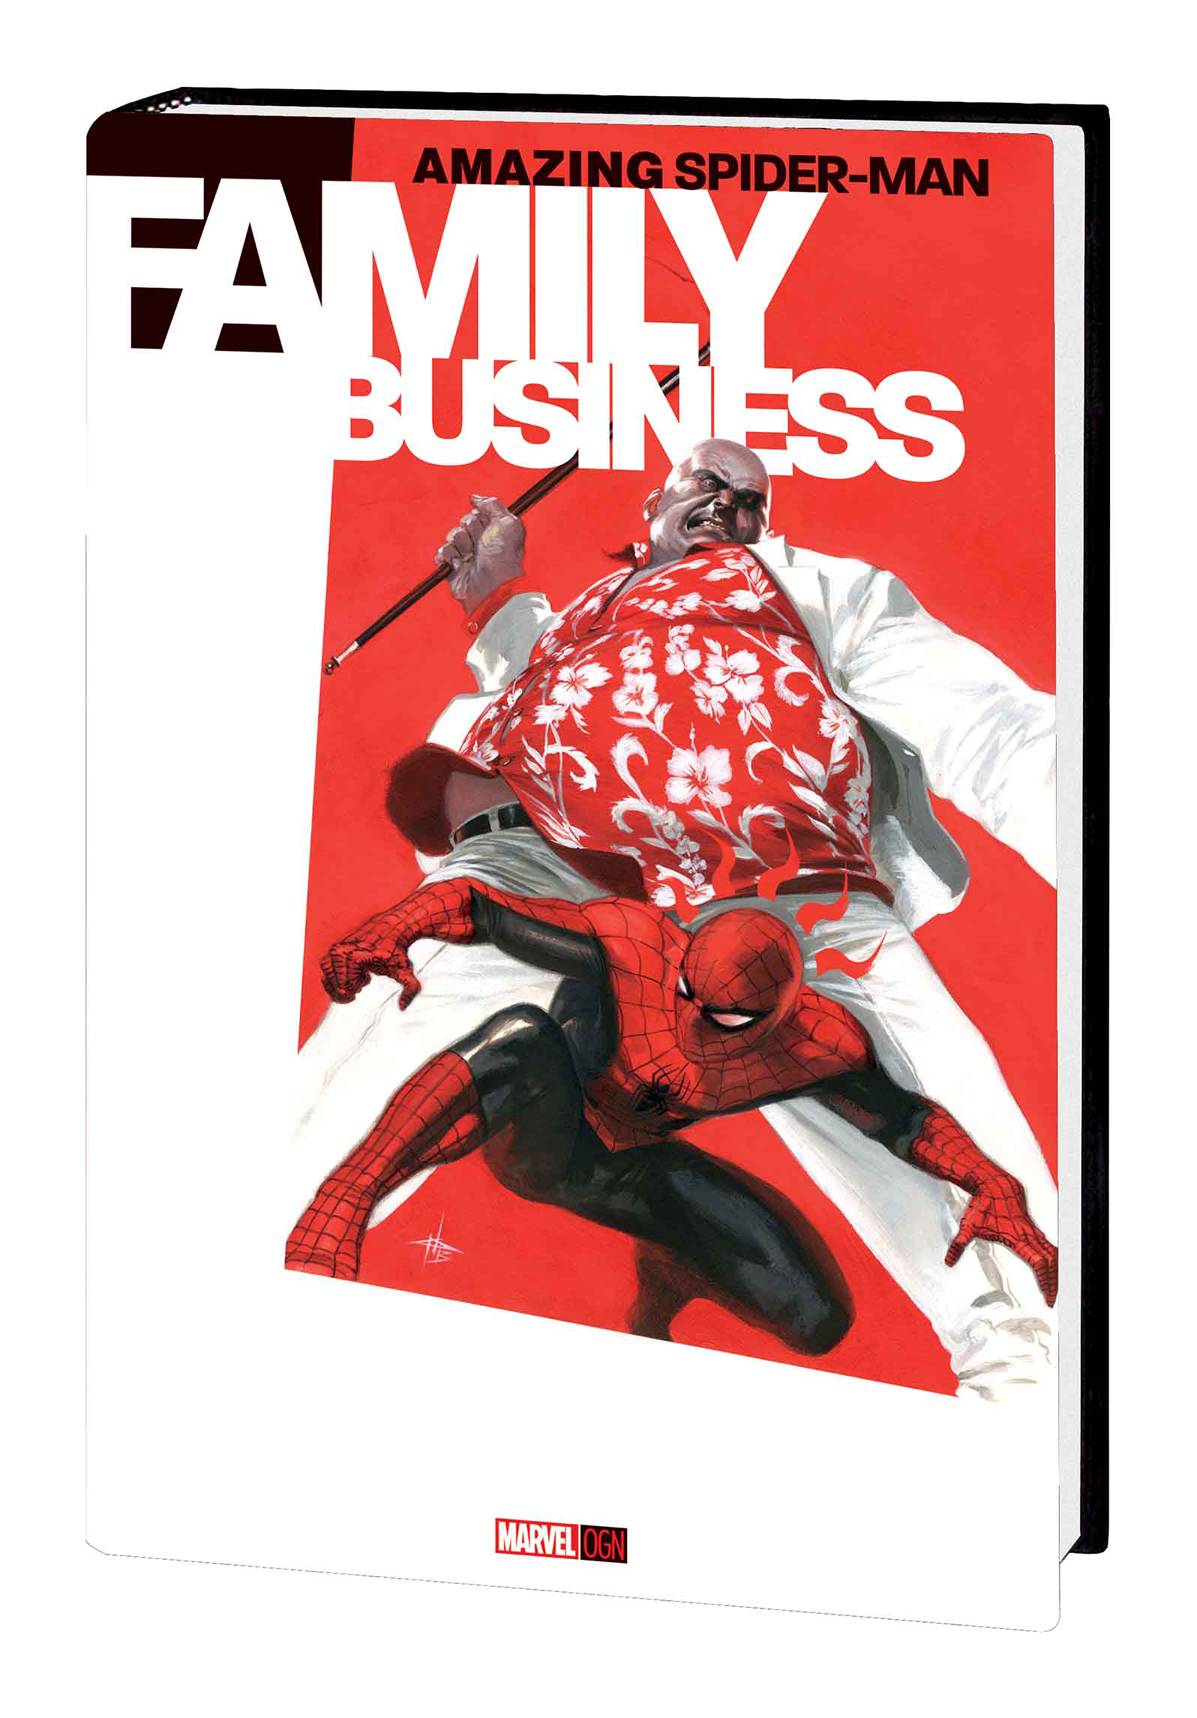 Amazing Spider-Man Family Business Hardcover